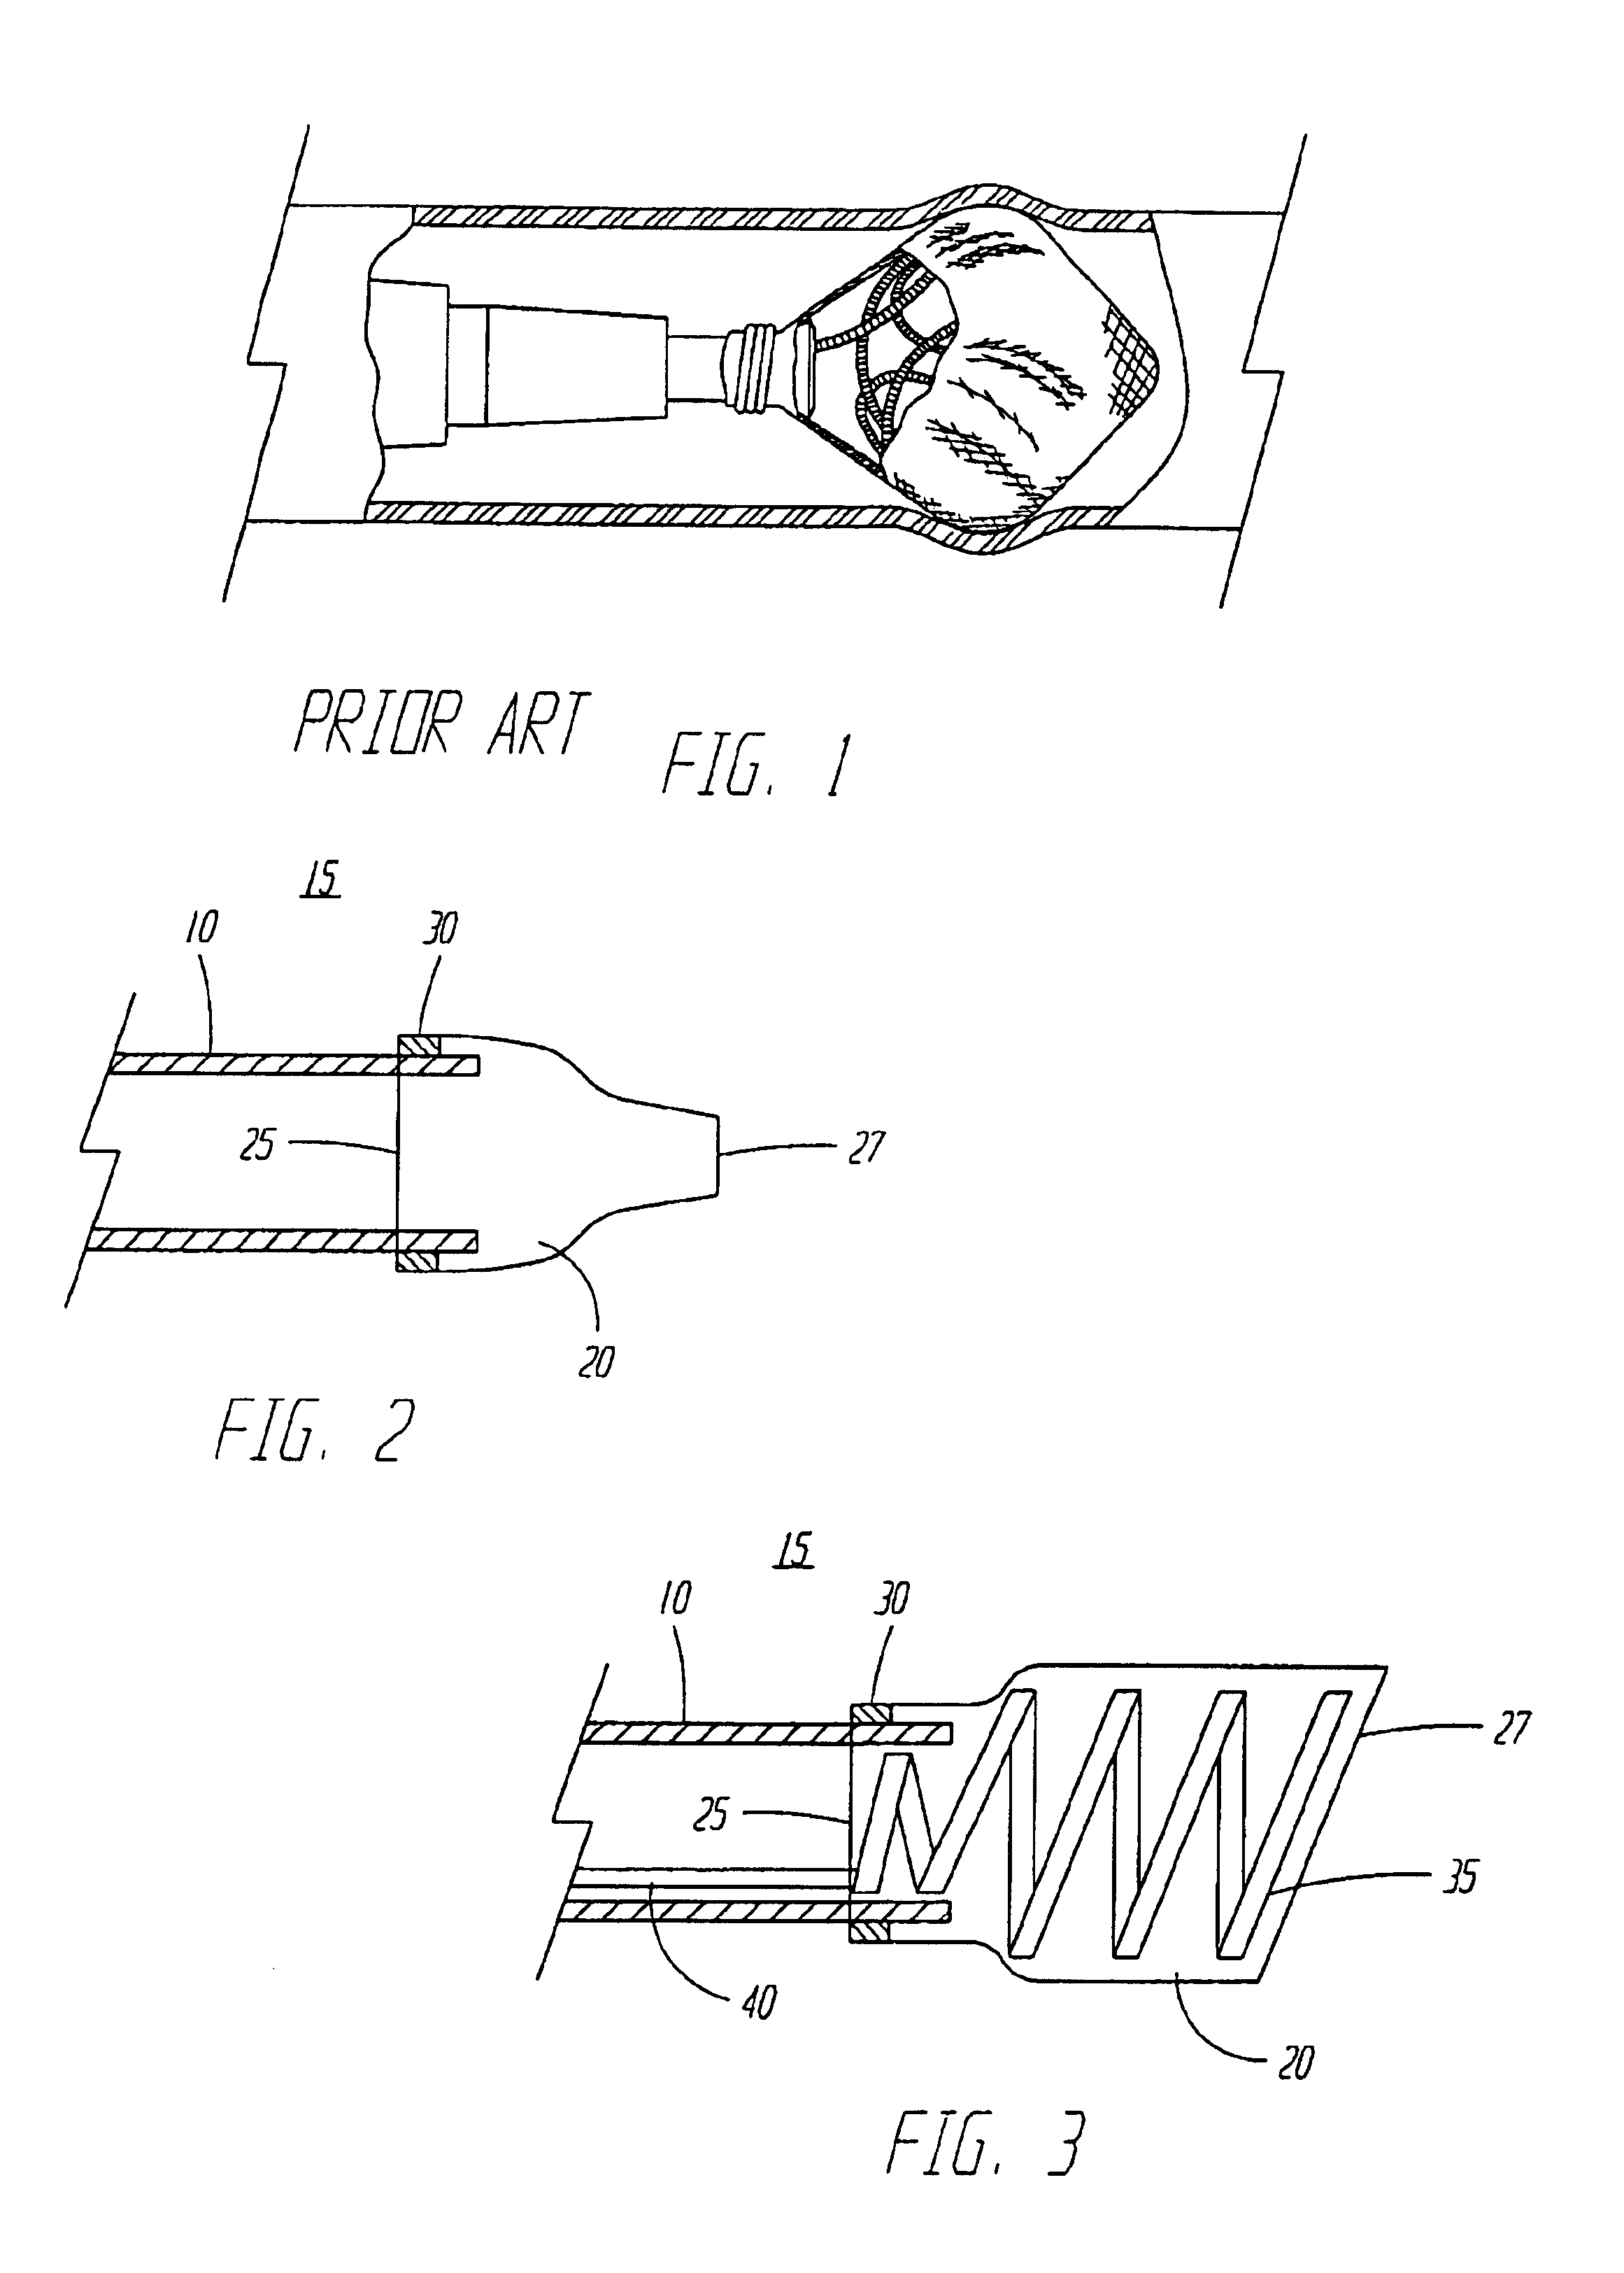 Systems and methods for detaching a covering from an implantable medical device